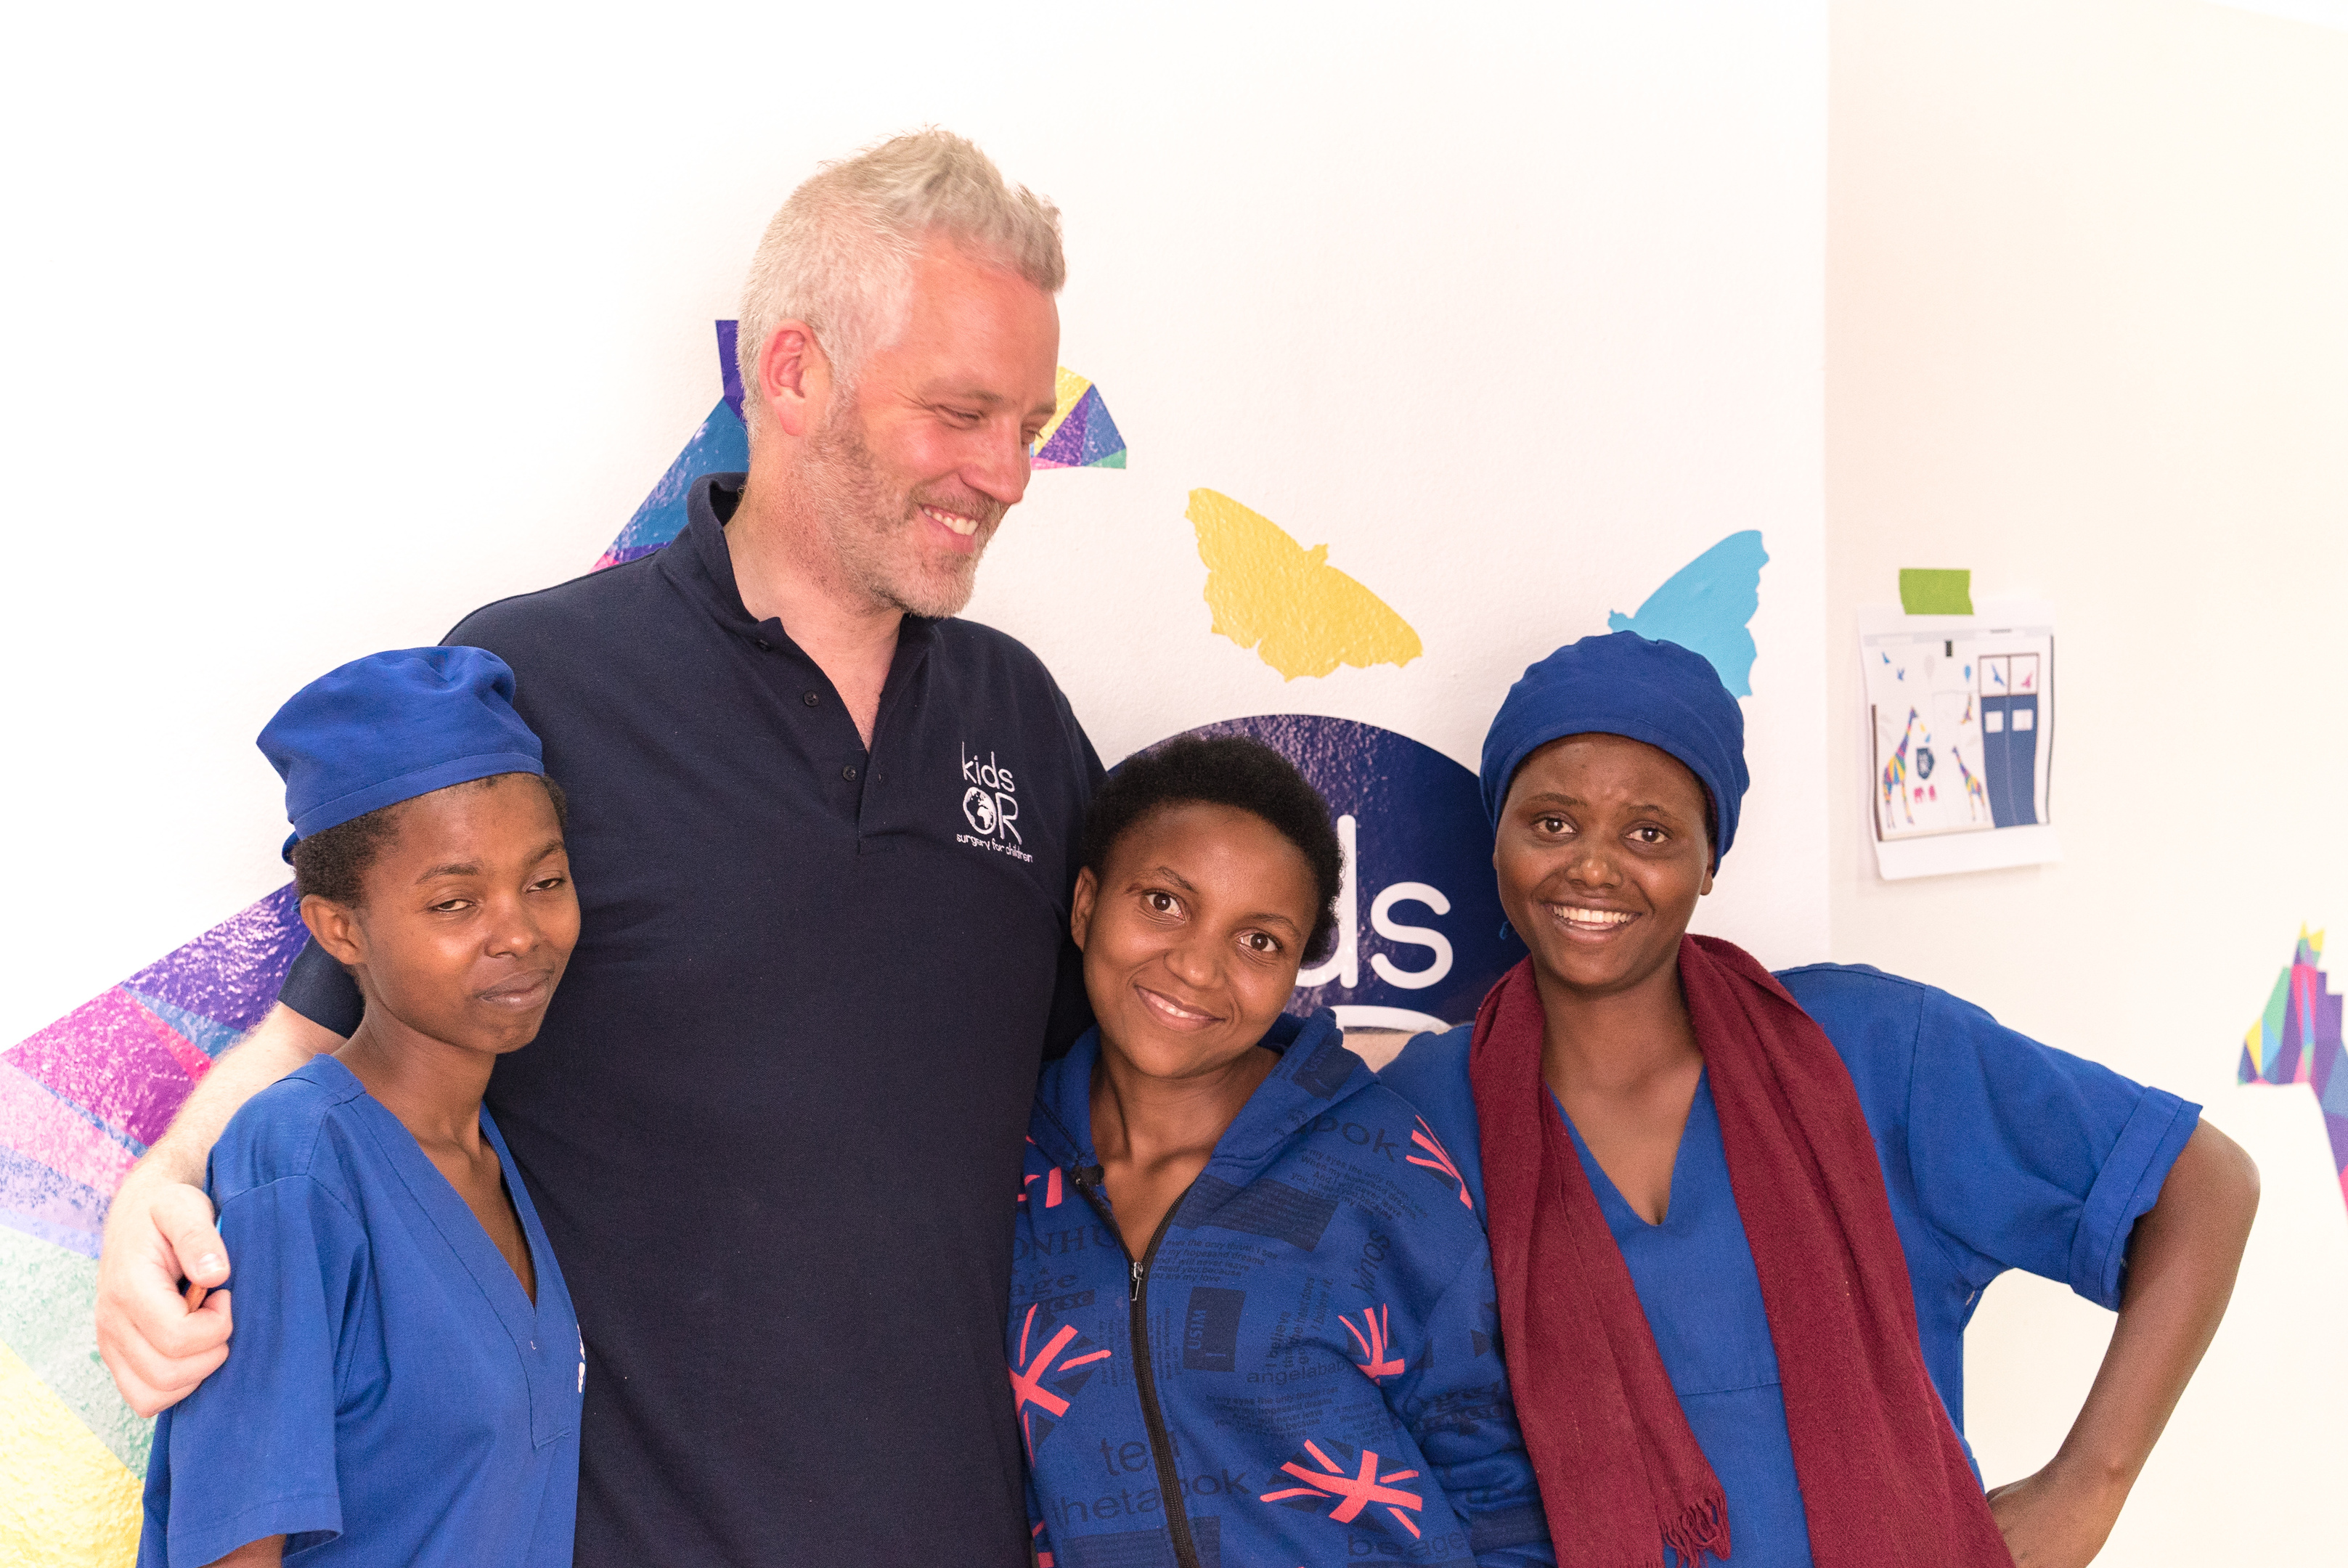 KidsOR Founder Garreth Wood meets some of the medical staff